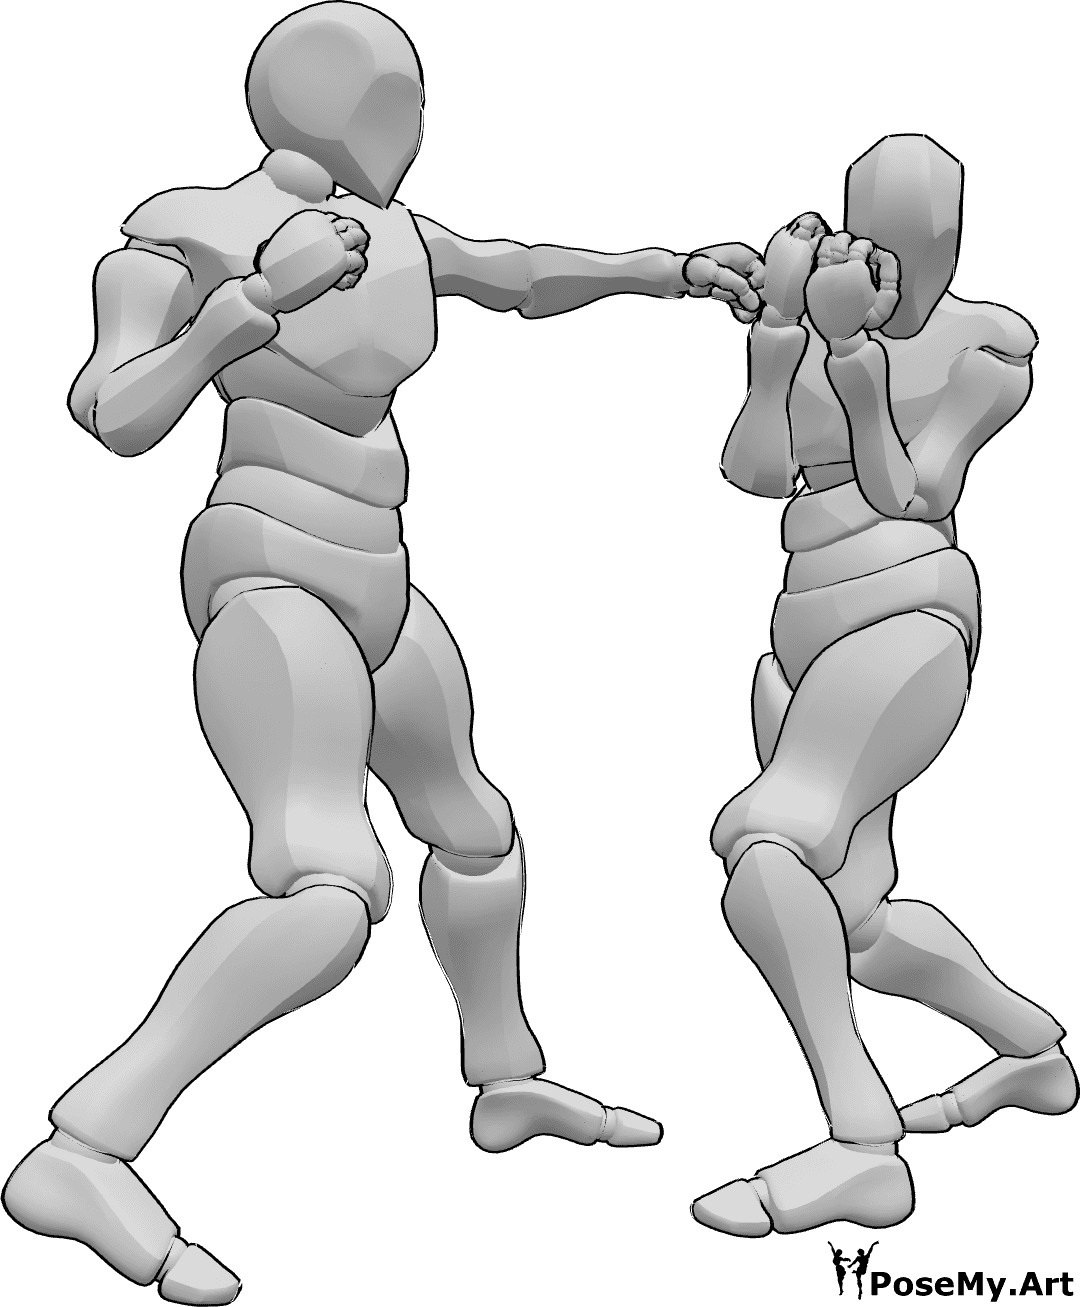 Pose Reference- Dodging left hook pose - Two males are boxing, one of them throwing a left hook, the other dodges the punch